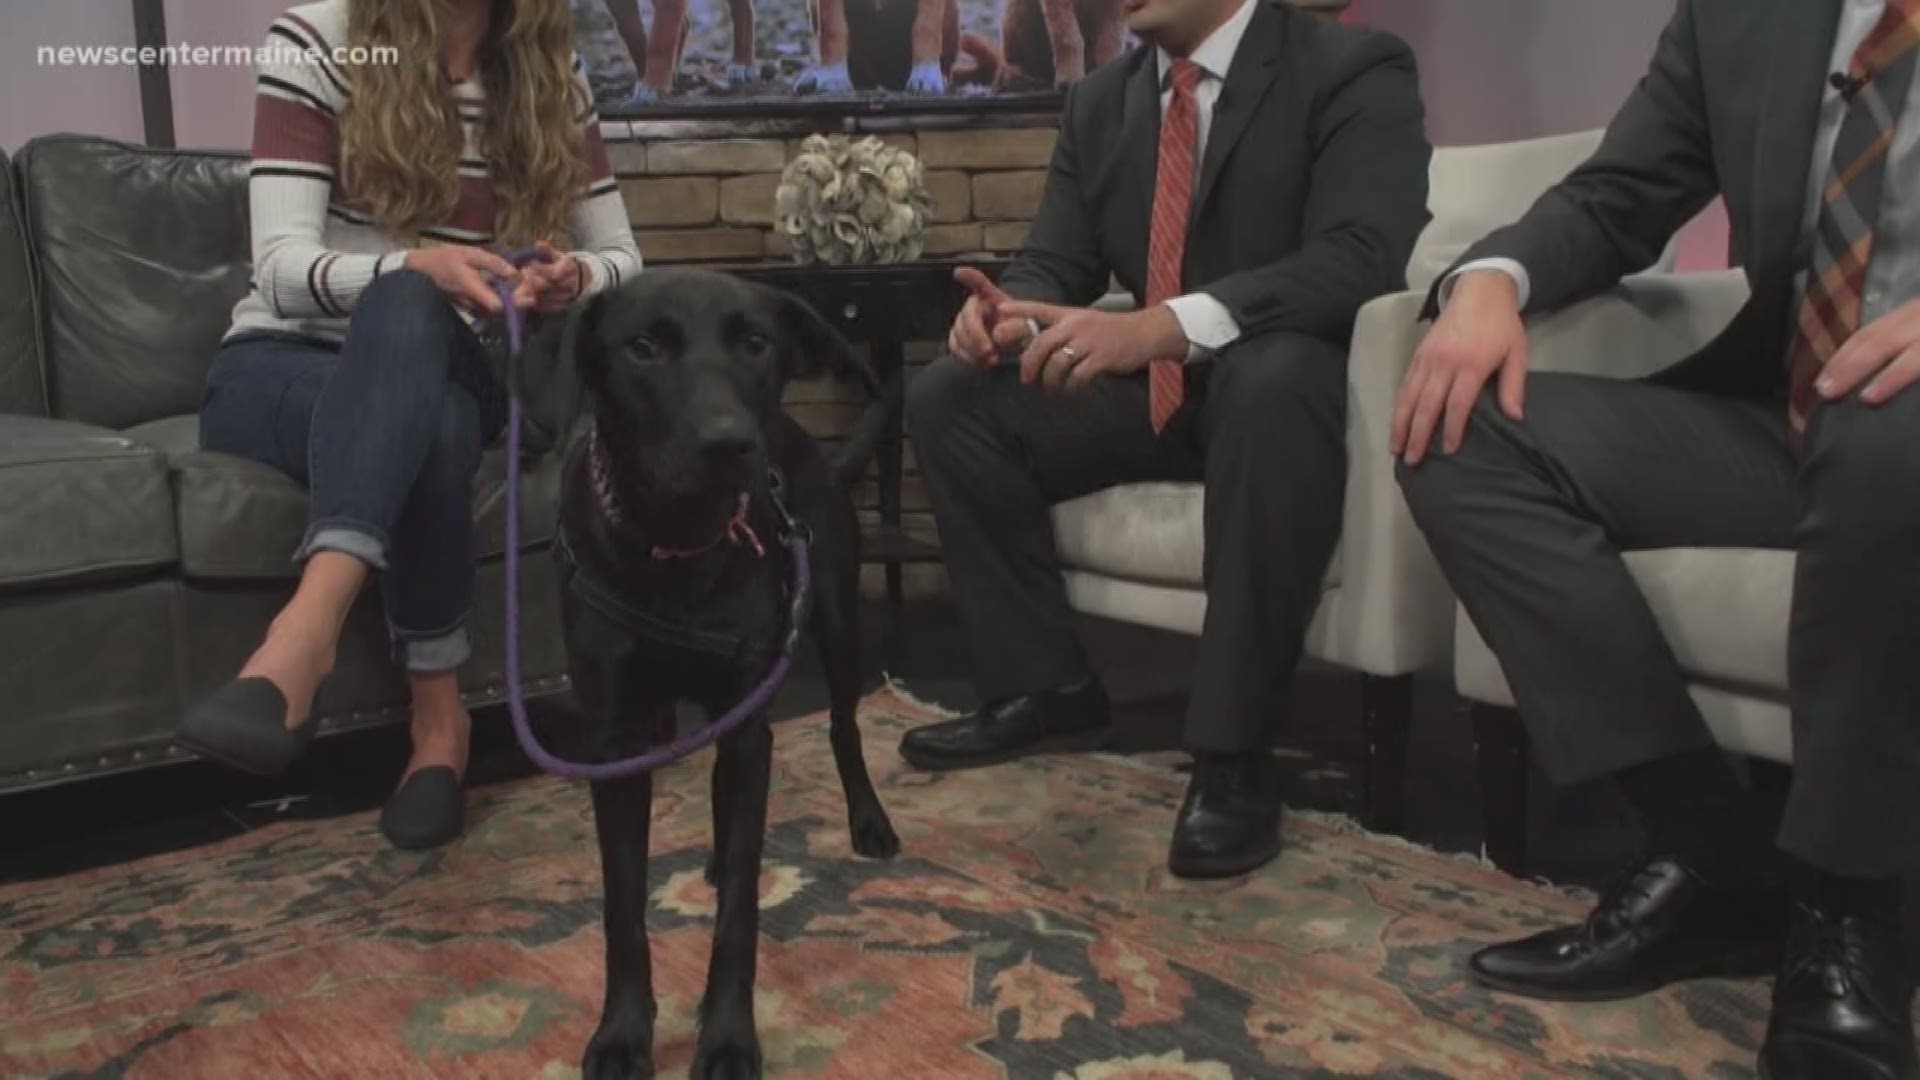 Talon the lab-mix, nicknamed Tallie, is up for adoption at New England Lab Rescue.